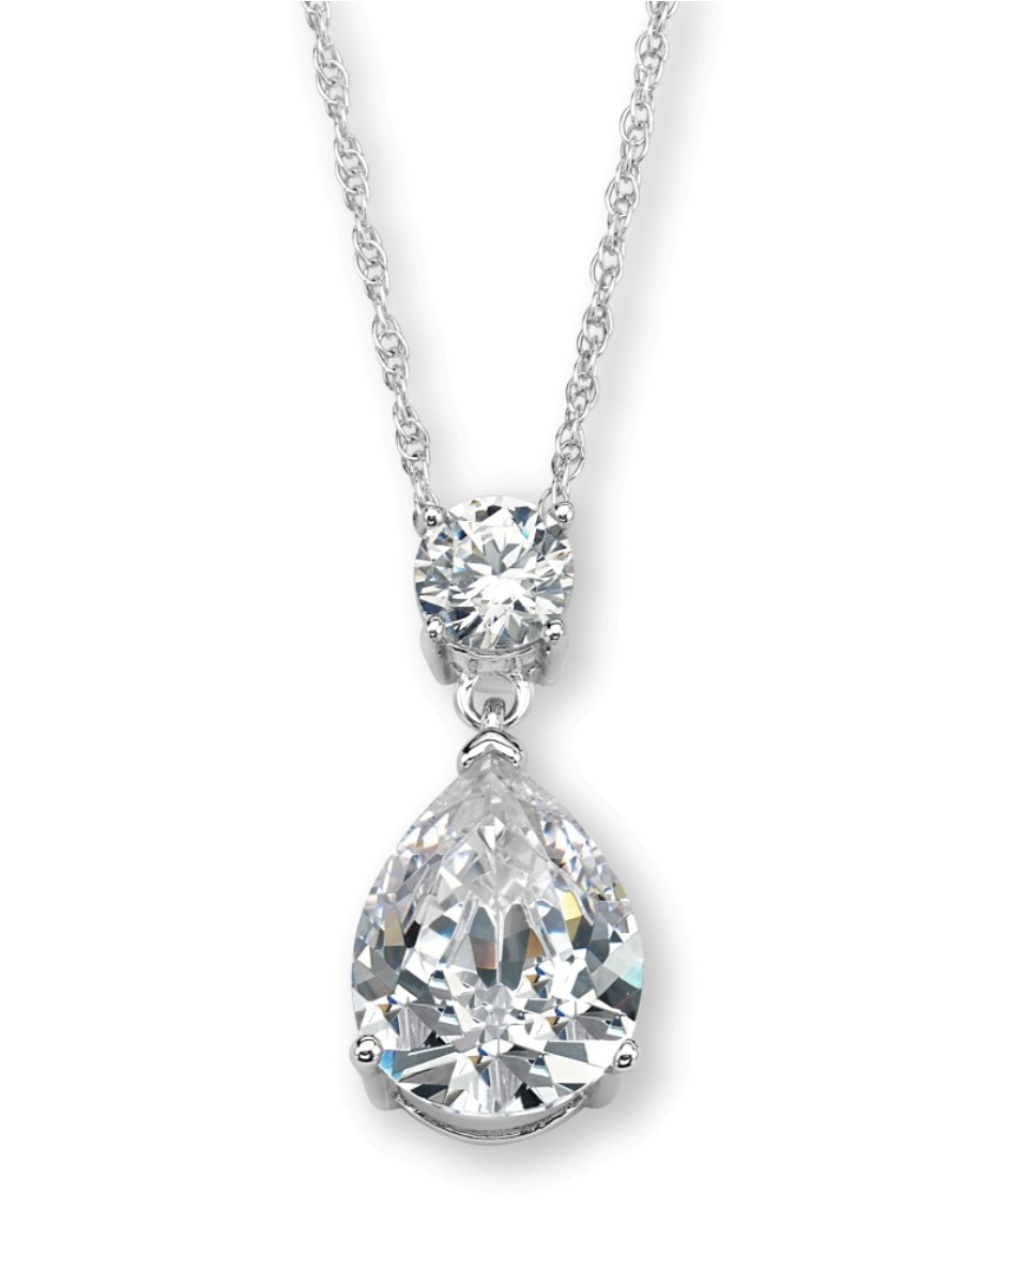 Pear and Round CZ Dangle Pendant Necklace, Rhodium Plated Sterling Silver, 18